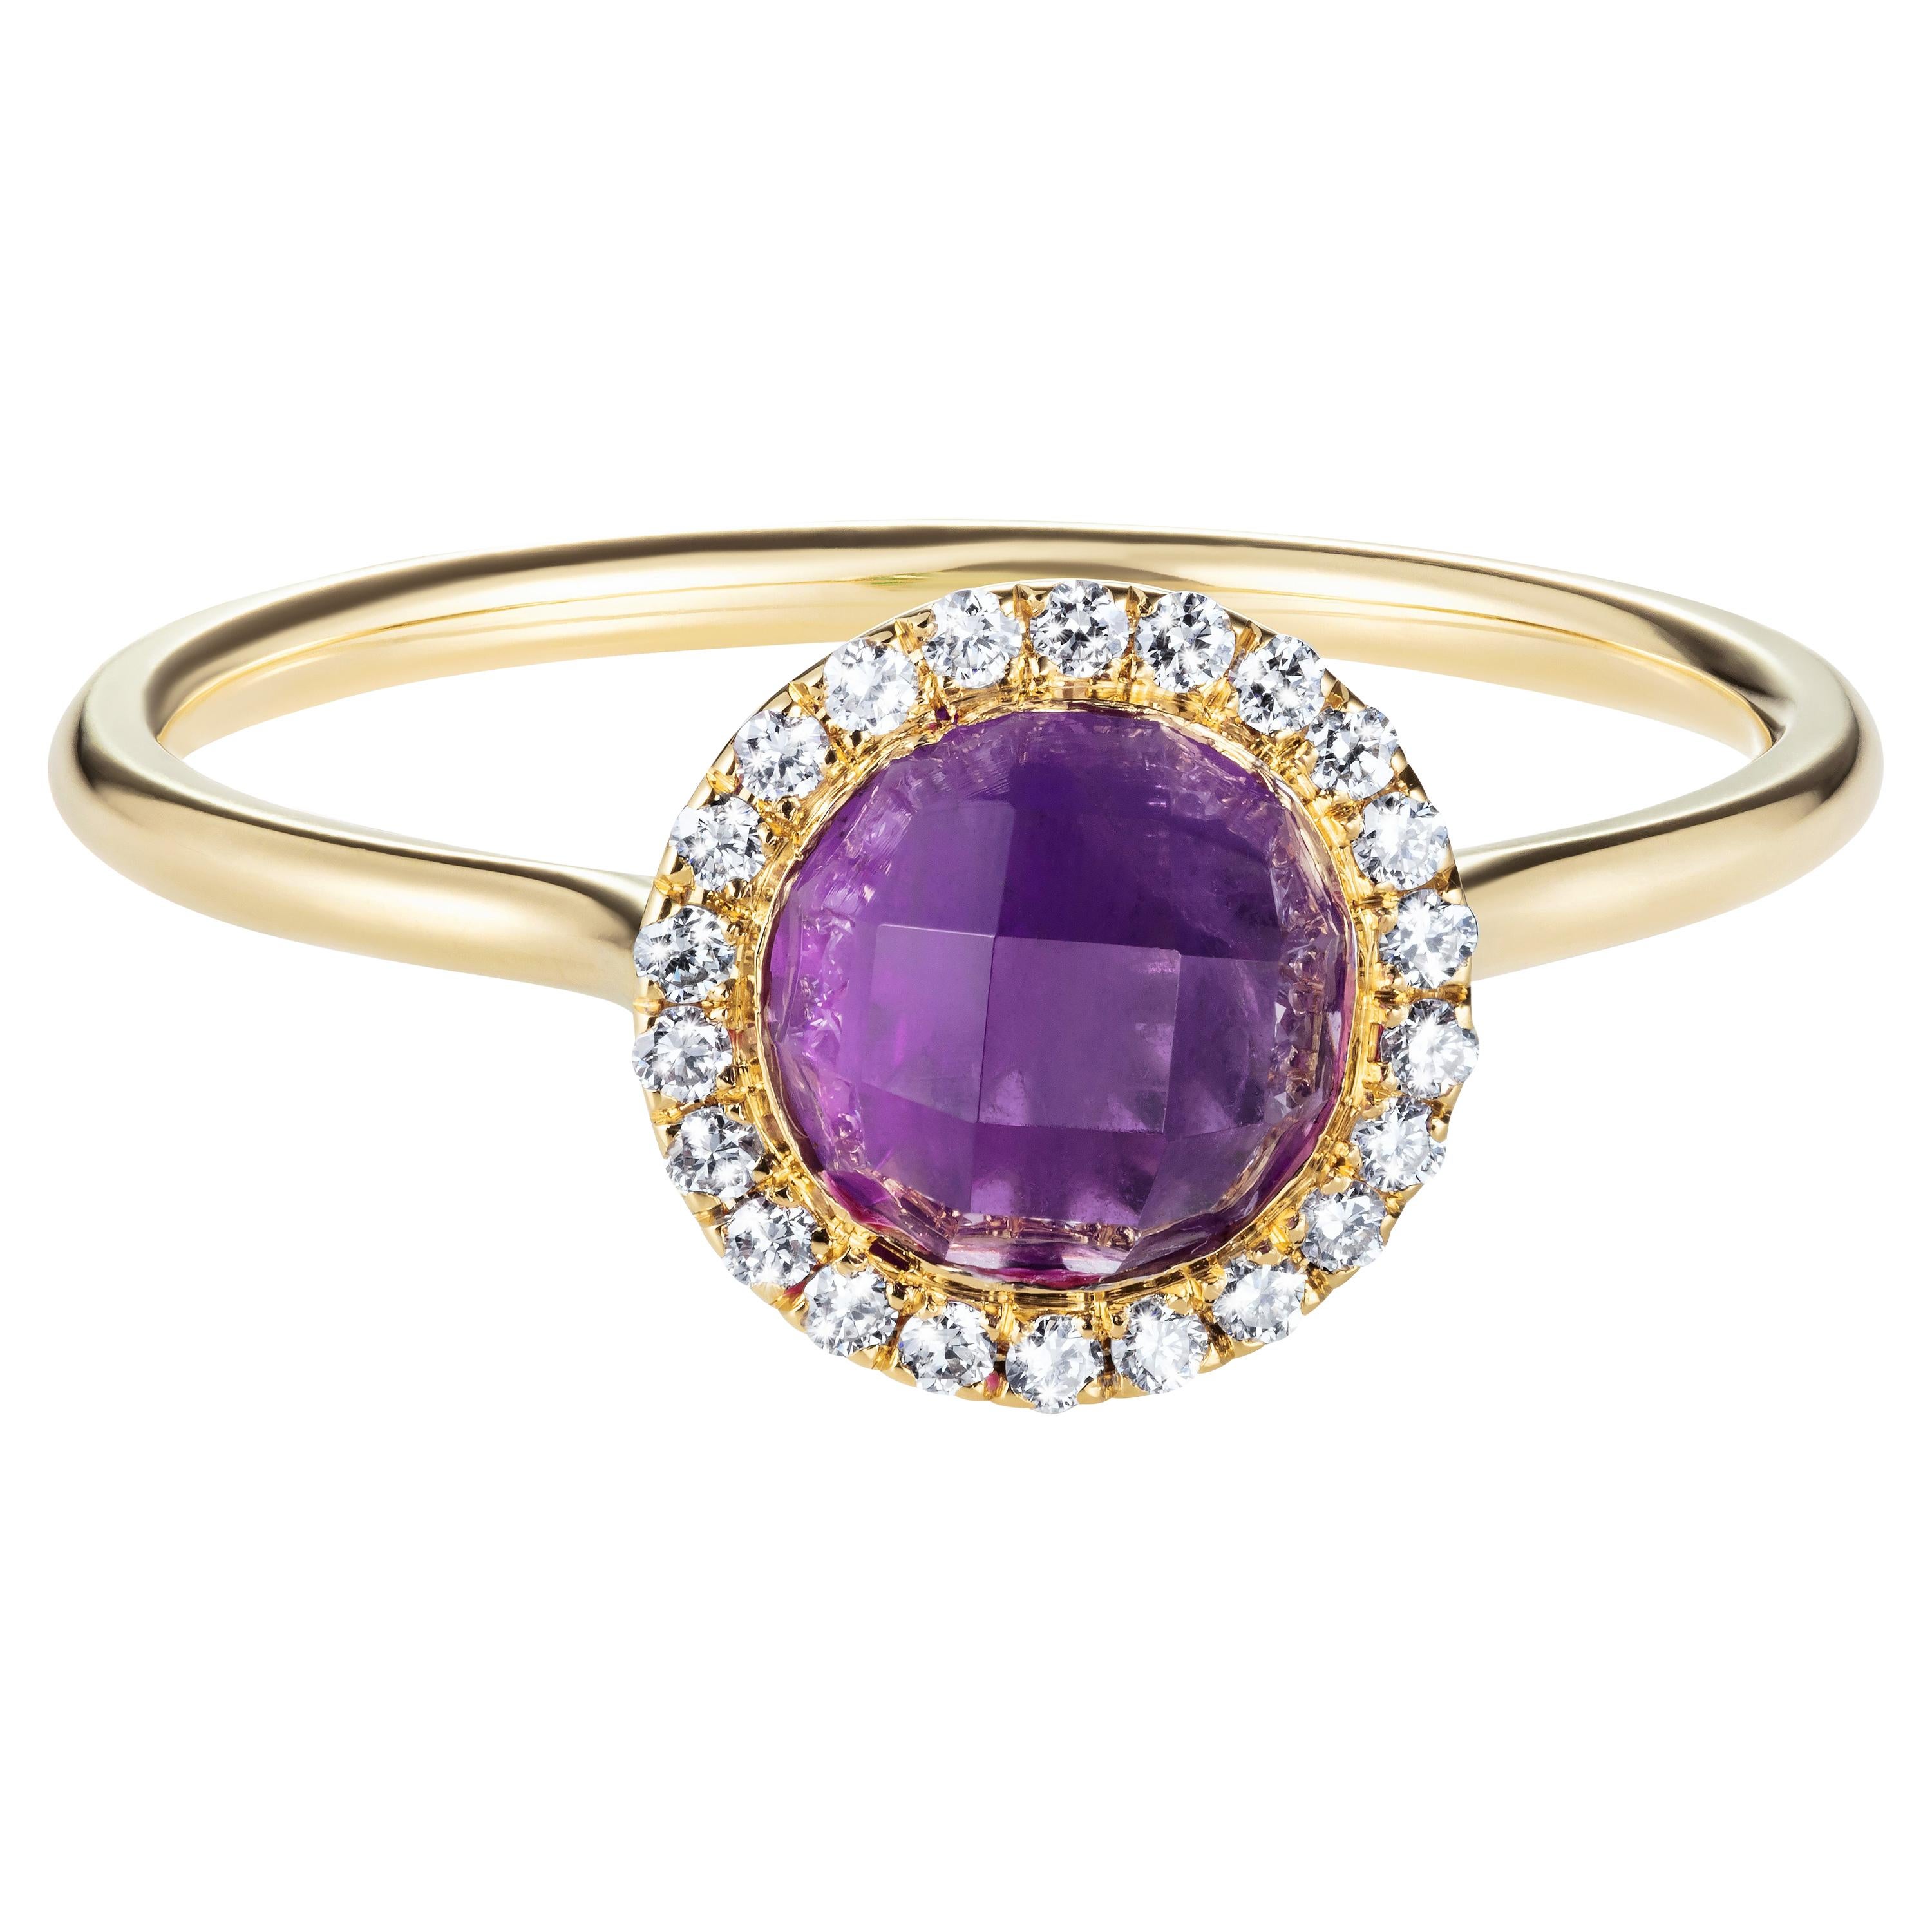 Marcel Salloum 2.16 Carat Purple Amethyst Halo Ring in 18 Yellow Gold For Sale